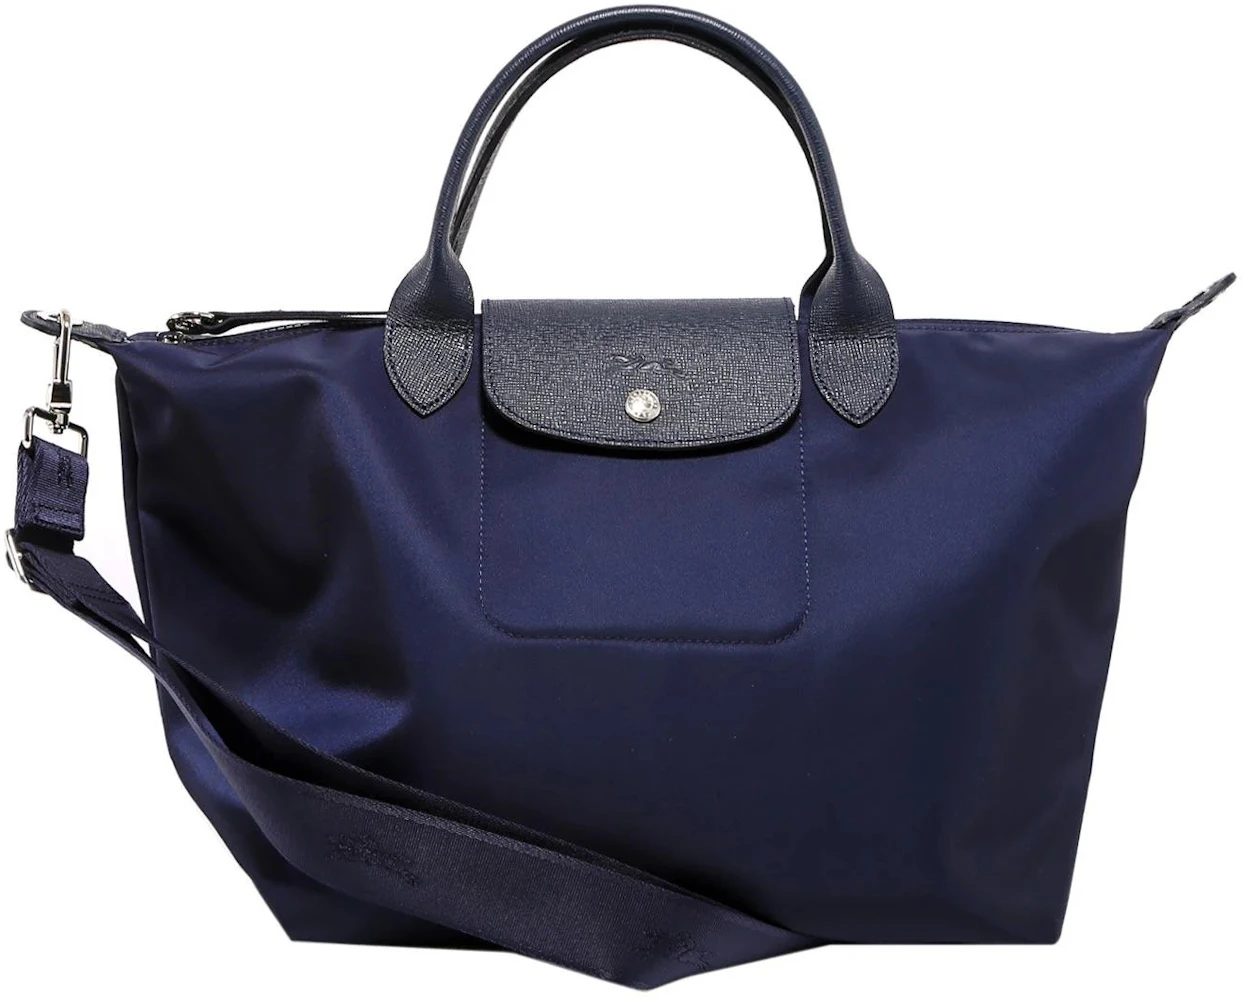 Longchamp Neo Small Brand new and authentic, this will be